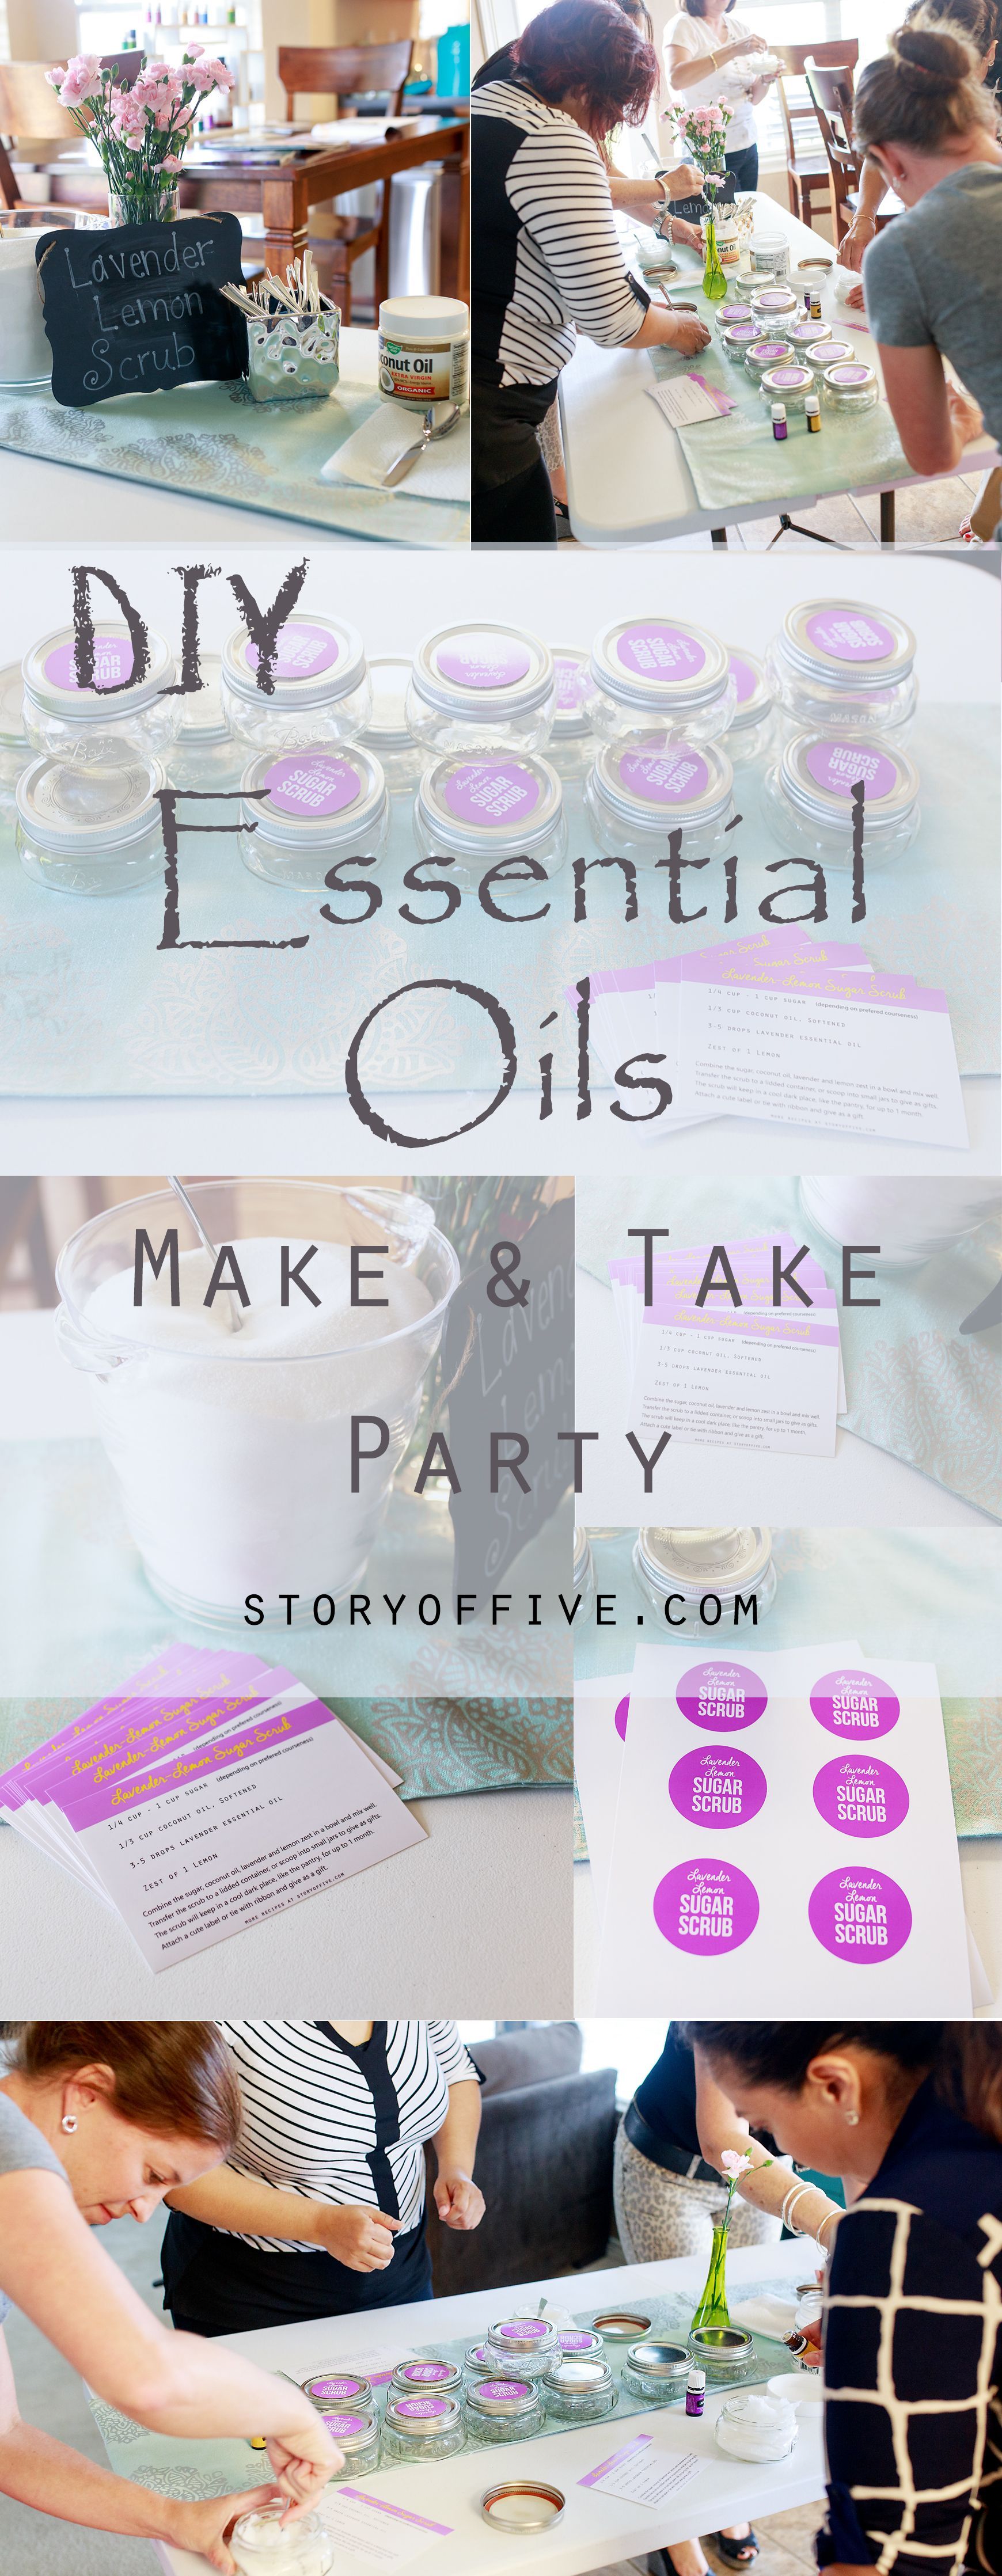 DIY Essential Oils make & take Party | How to have a successful essential oils make & take party || Free Recipe Card and Sugar